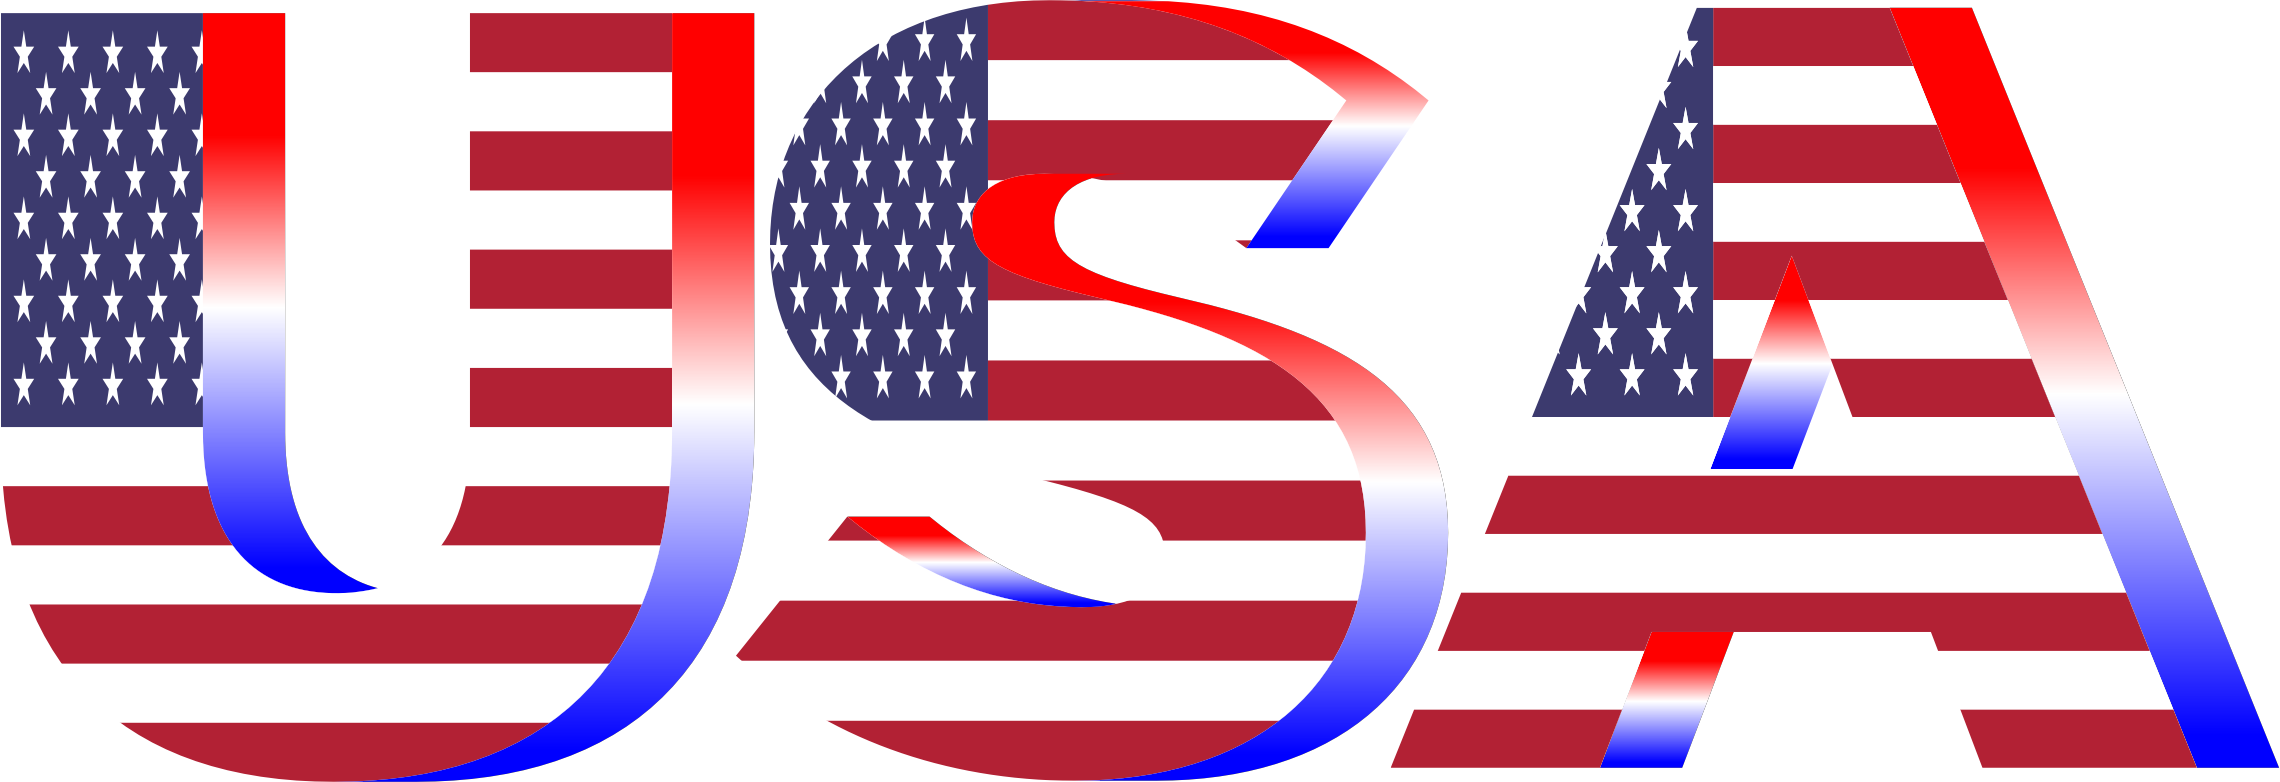 United States PNG HD - 130089